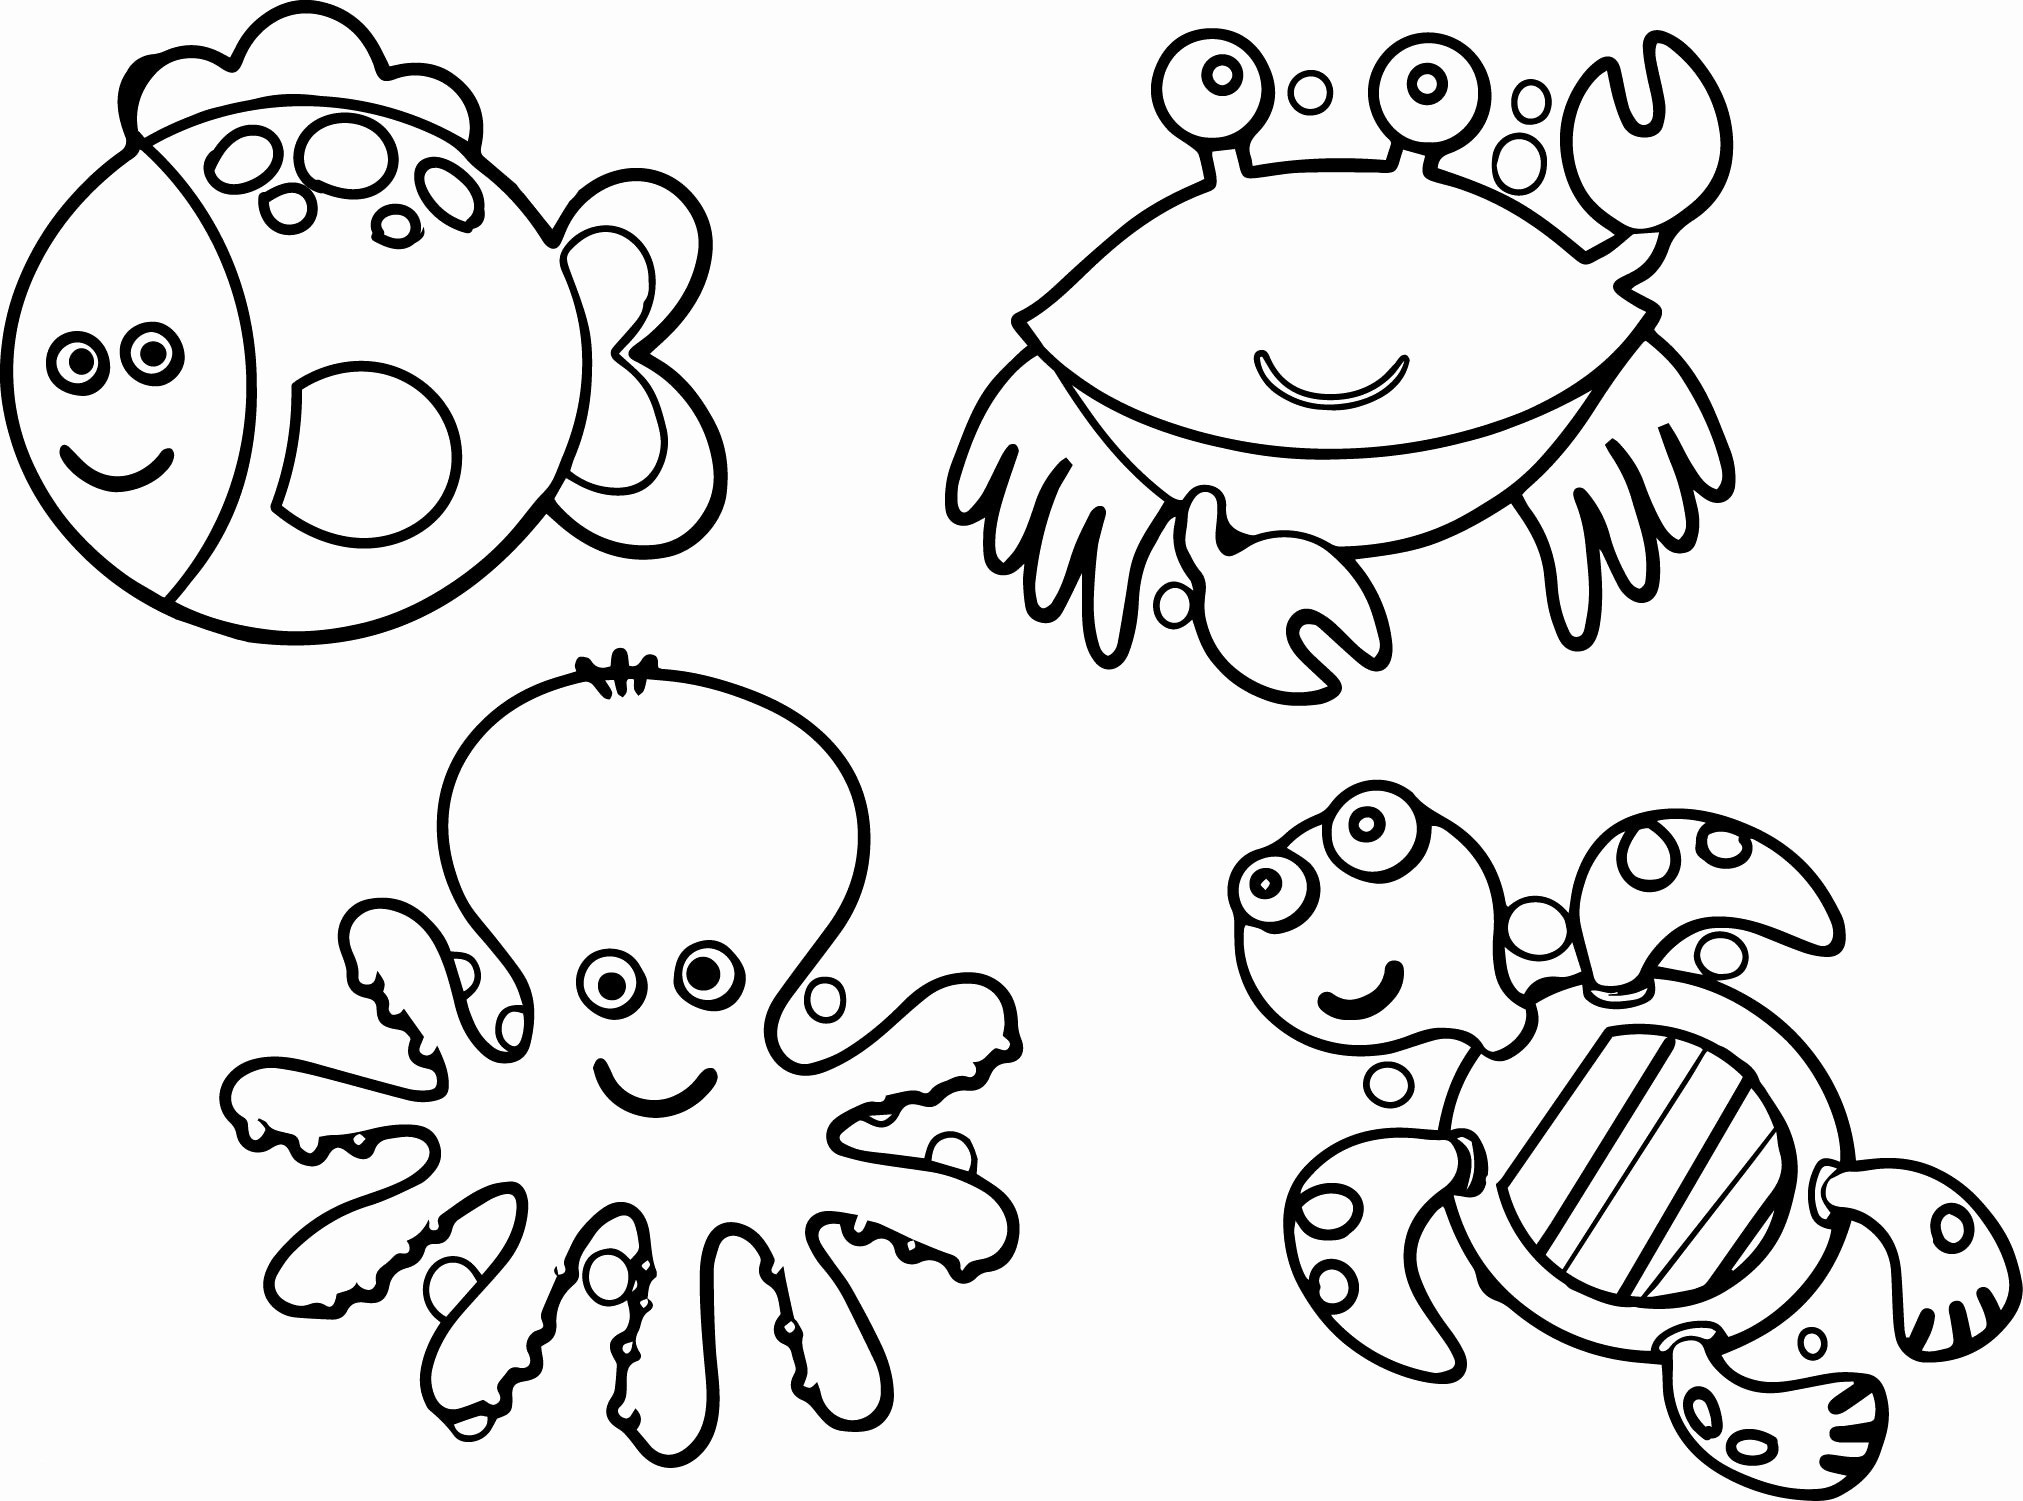 Free Printable Animal Coloring Pages Unique Ocean Animals Coloring Pages Awesome Animal Sea Creatures